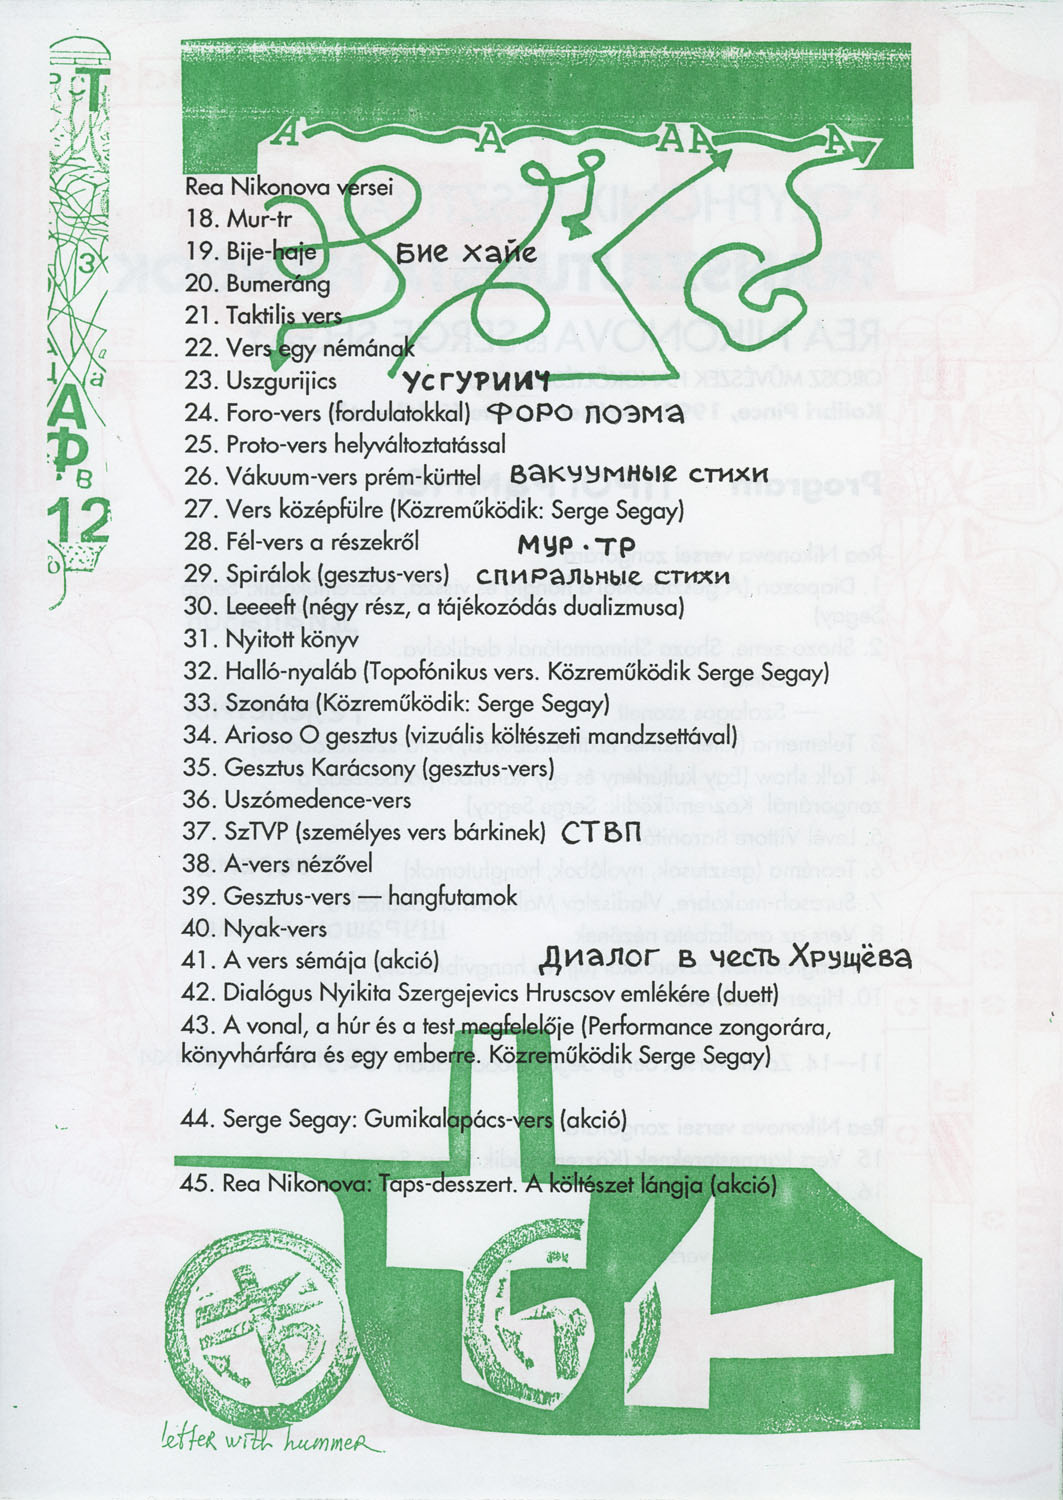 Poster for Transfuturist Sounds - performances by the Russian sound poets Rea Nikonova and Serge Segay, the final event of Polyphonix Festival organized by Artpool at Kolibri Pince, Budapest, 1994 (2nd page)